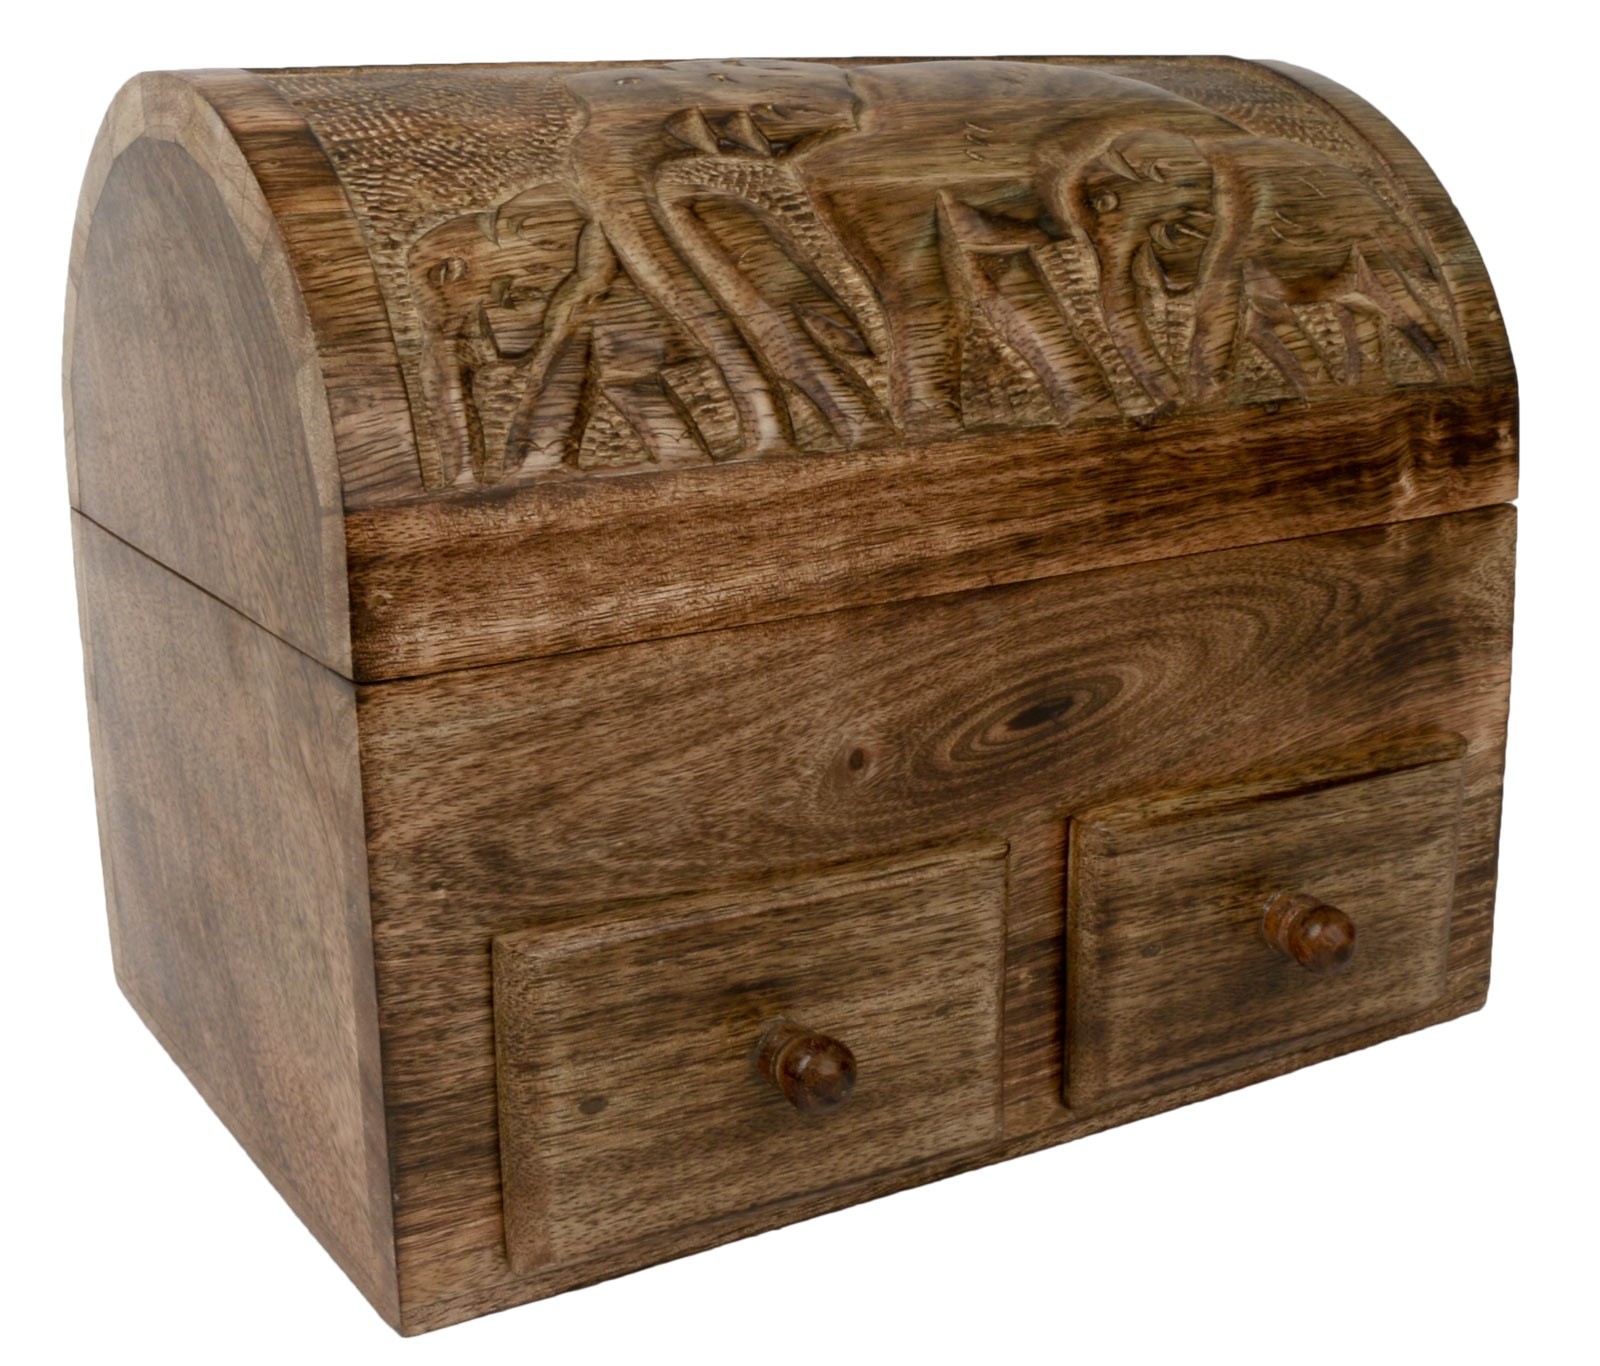 Mango Wood Elephant Dome Top Box with 2 Drawers 25.5cm